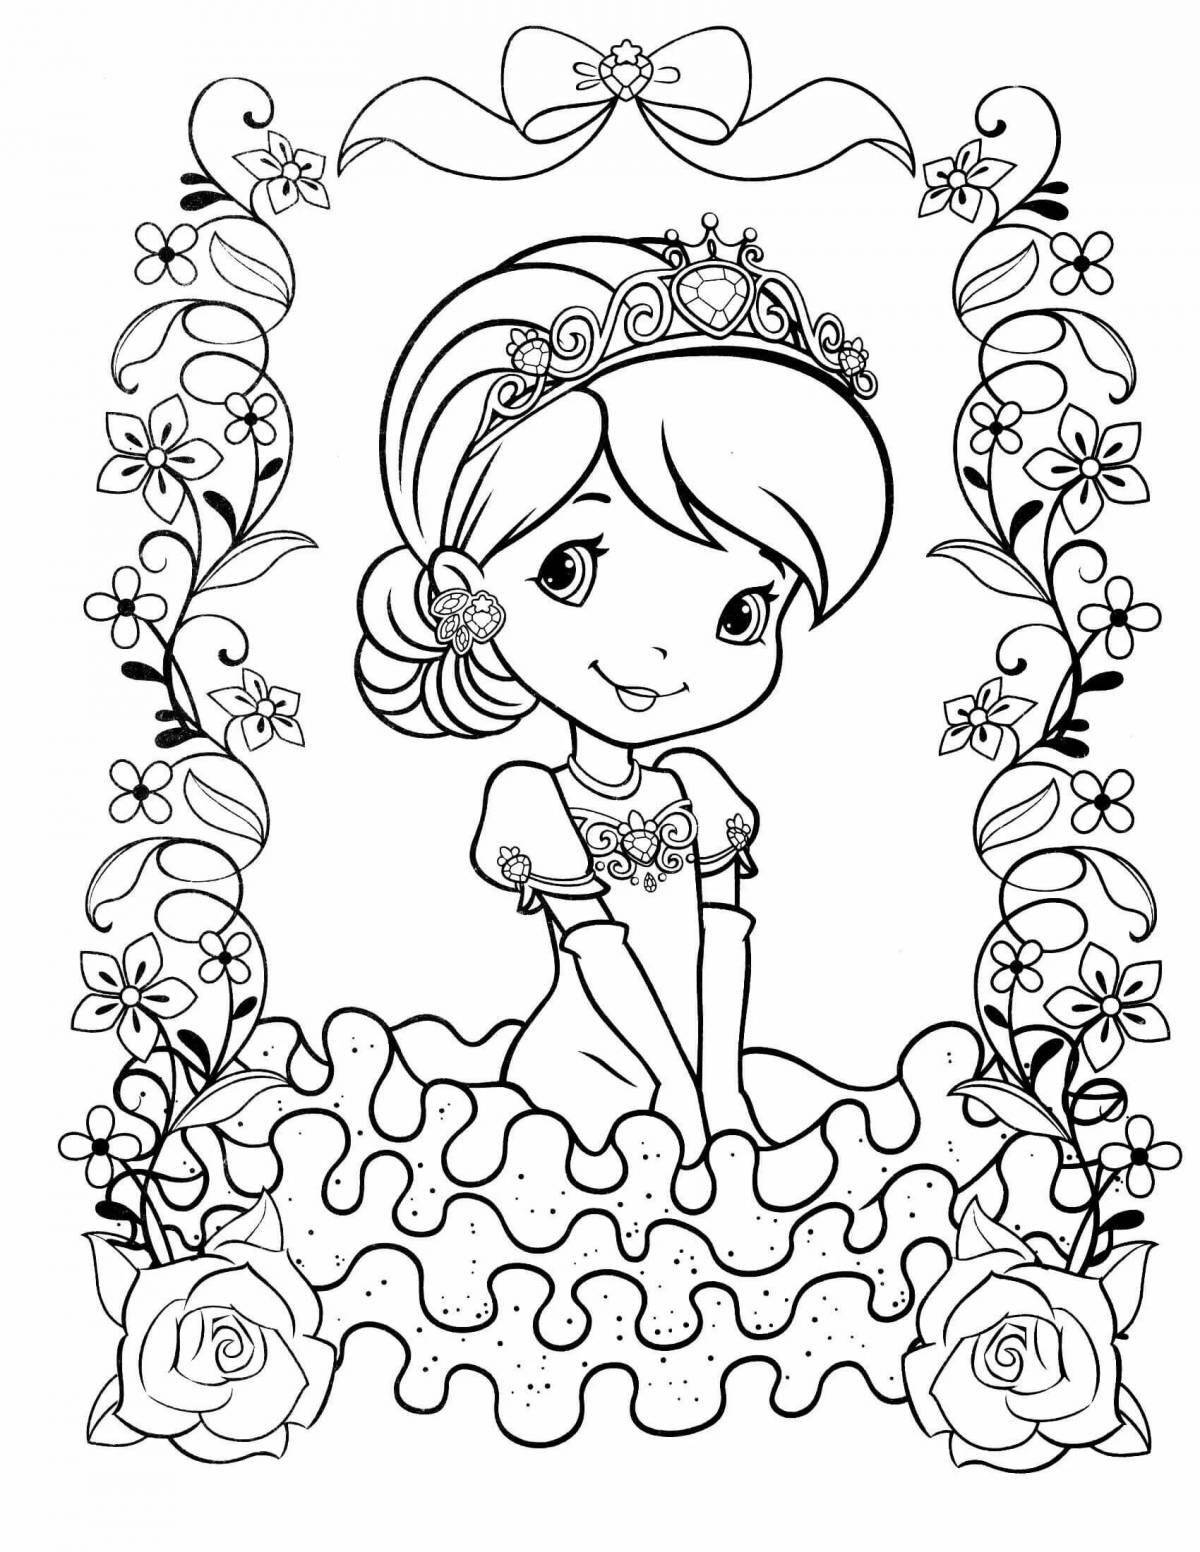 Gorgeous princess coloring book for girls 7 years old